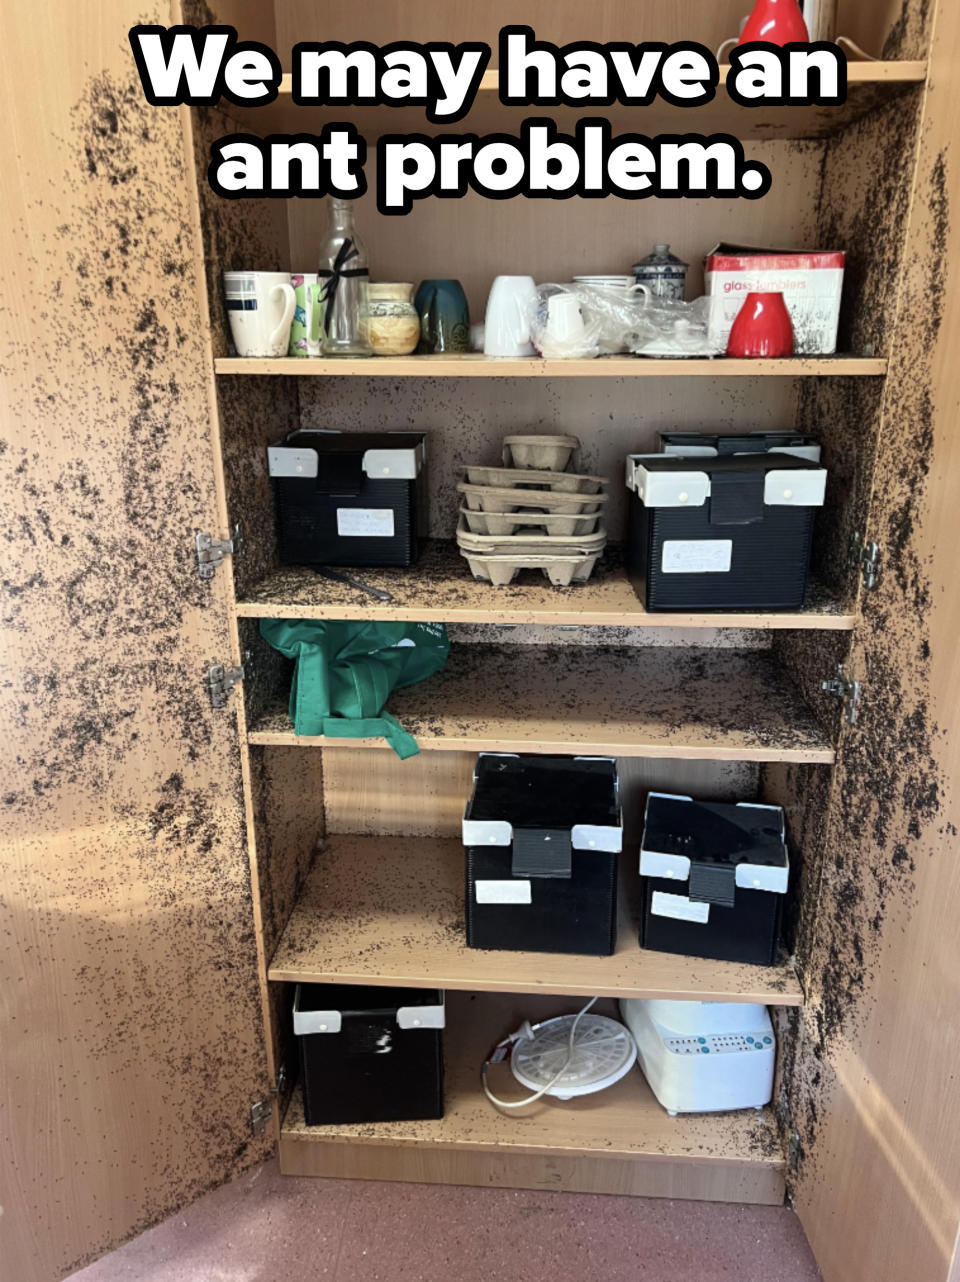 Pantry cupboard with black mold on the walls and shelf edges, containing various items like mugs, containers, egg cartons, and an apron